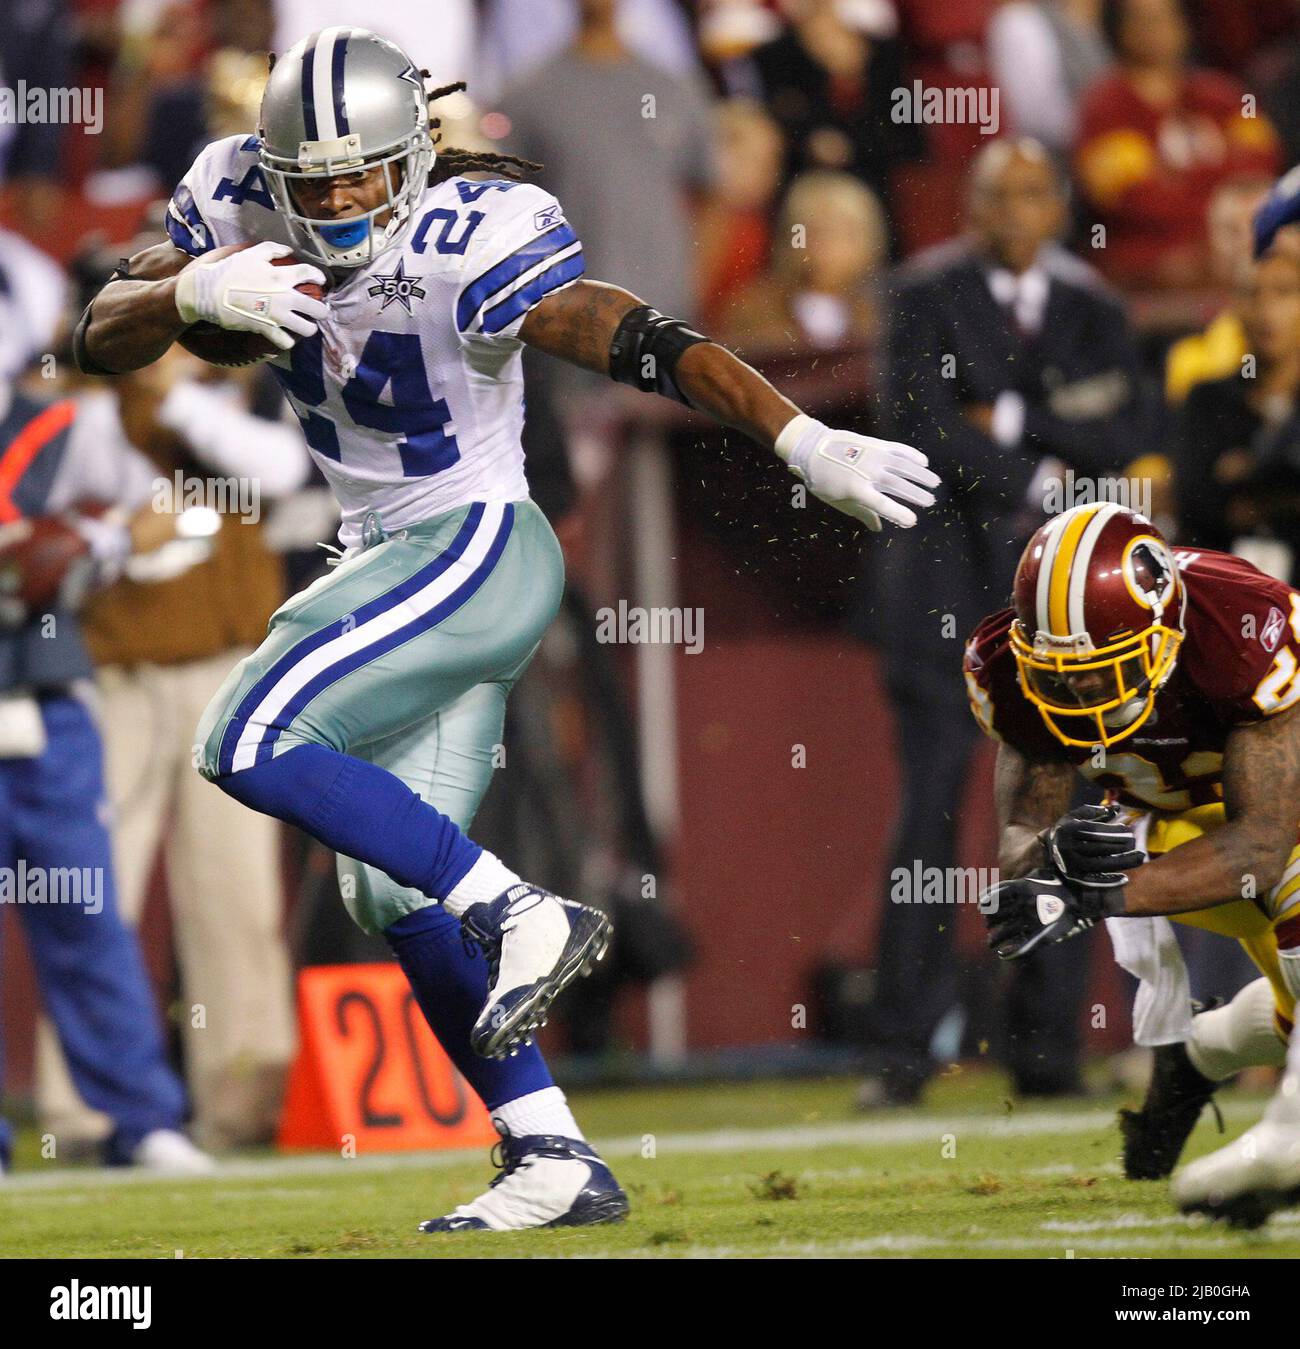 Landover, USA. 12th Sep, 2010. Dallas Cowboys running back Marion Barber (24) carries the ball against the Washington Redskins in Landover, Maryland, on Sept. 12, 2010. (Photo by Ron T. Ennis/Fort Worth Star-Telegram/TNS/Sipa USA) Credit: Sipa USA/Alamy Live News Stock Photo